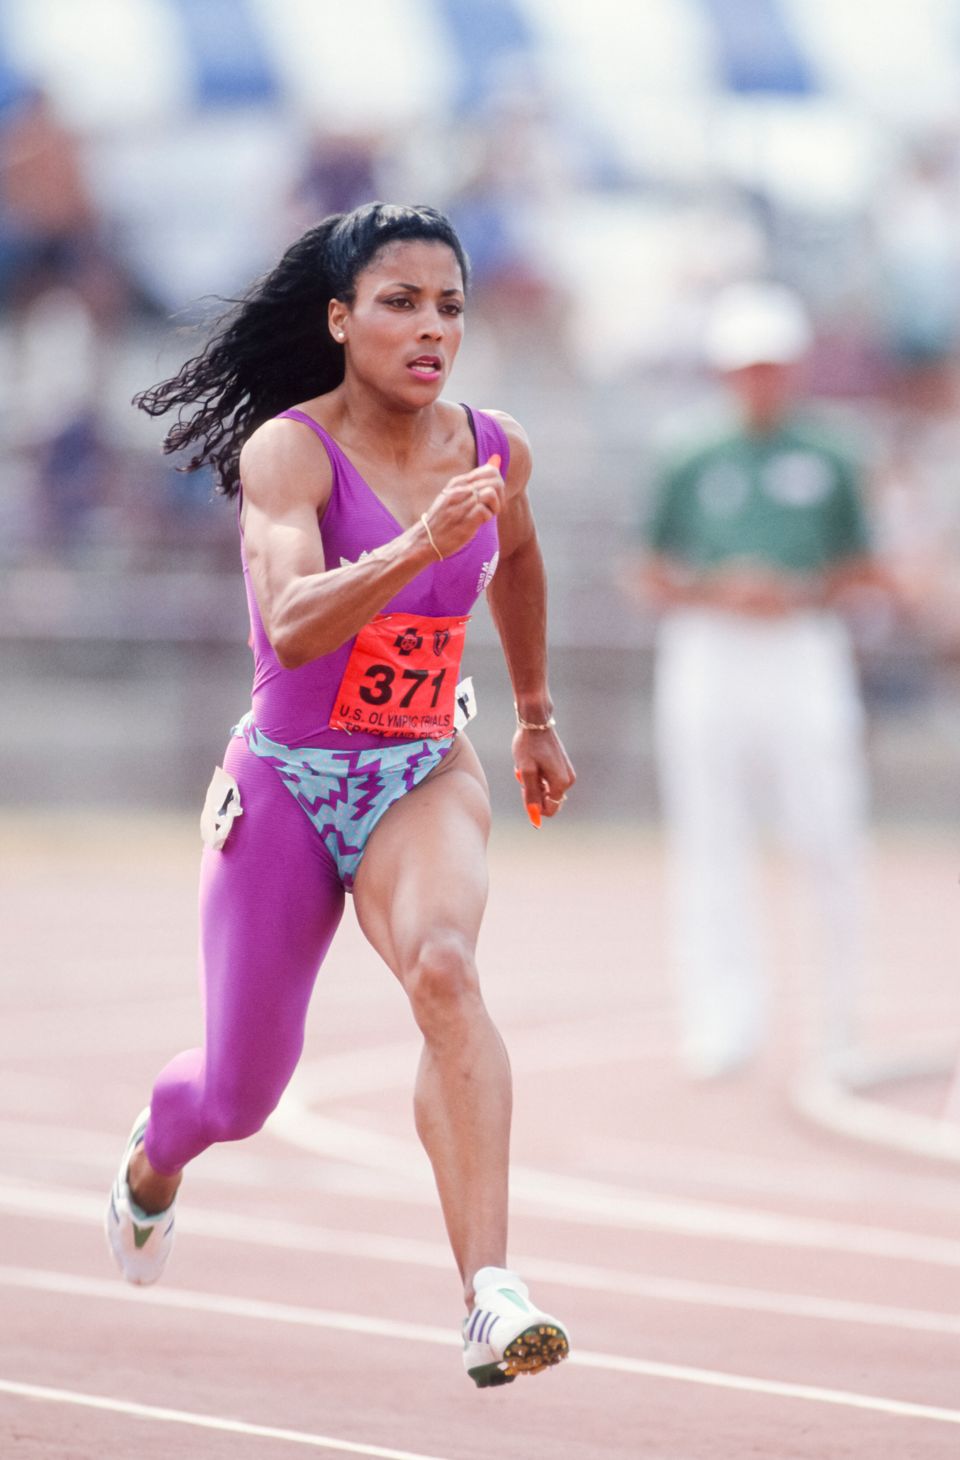 The ultimate sports style icon that is, Flo Jo.